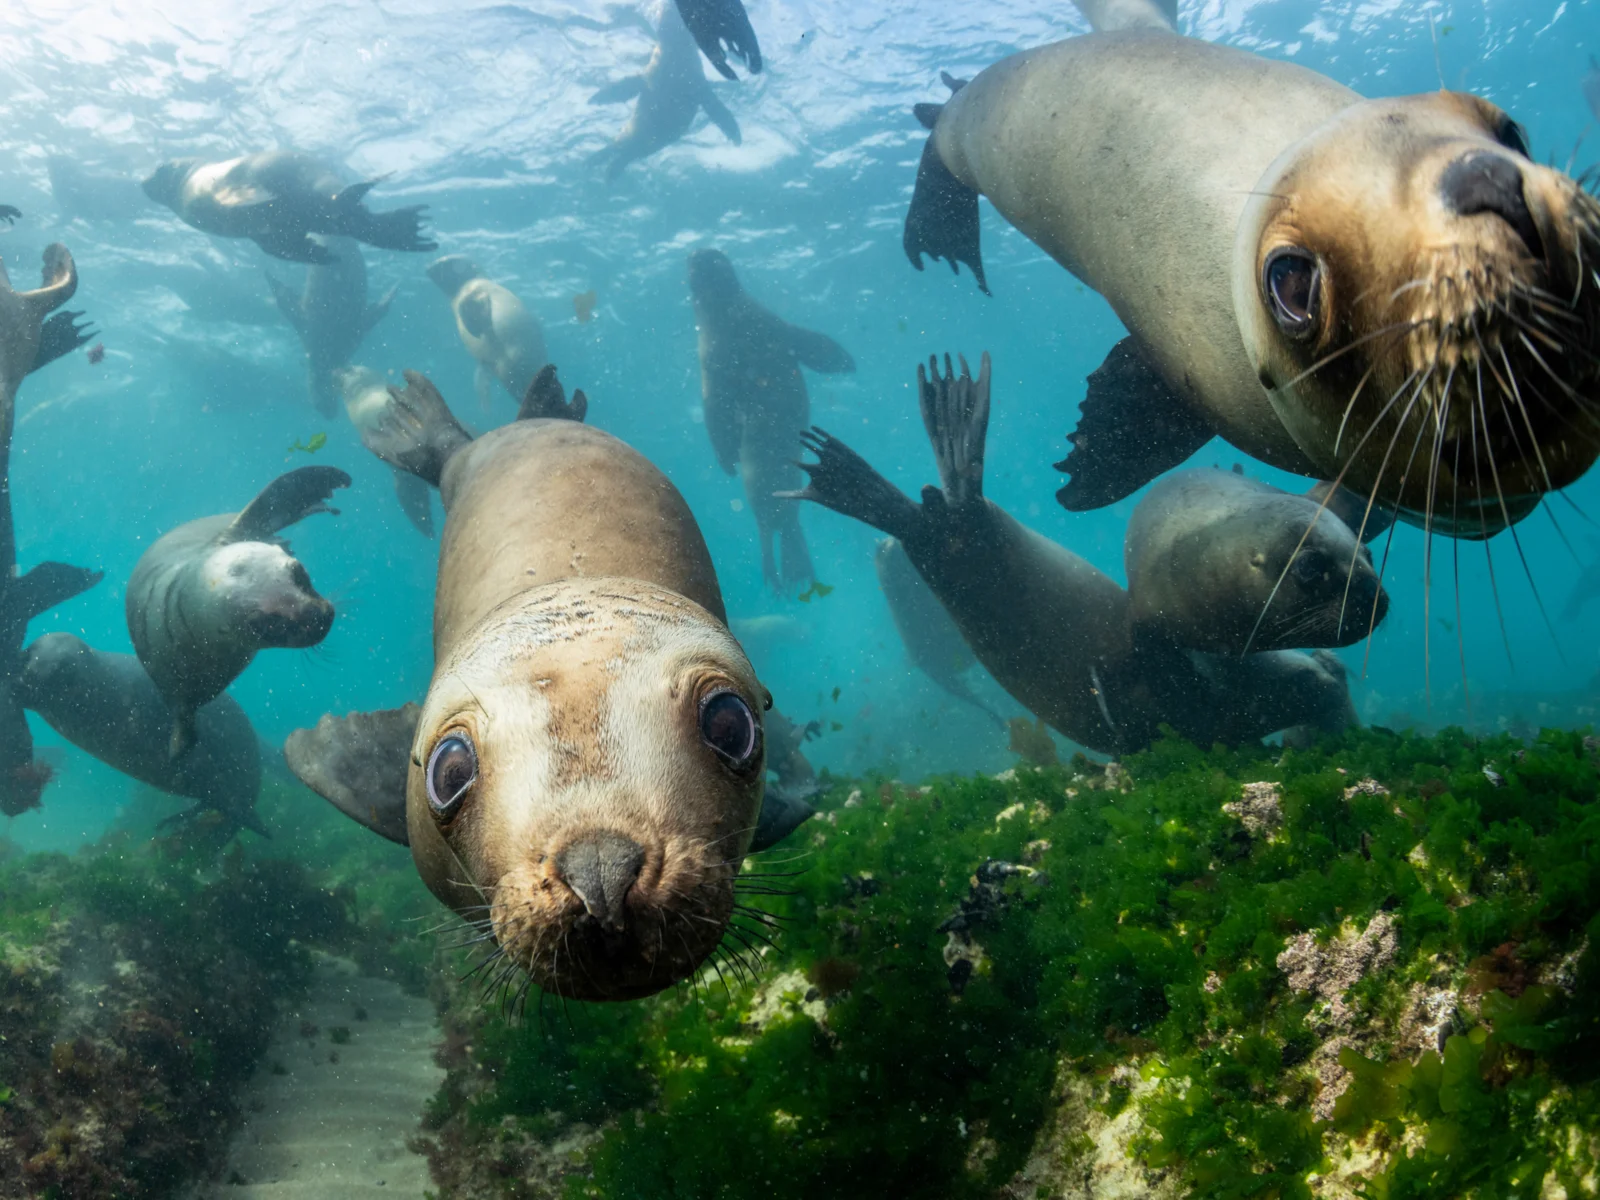 Cute seals pictured during the cheapest time to visit Argentina